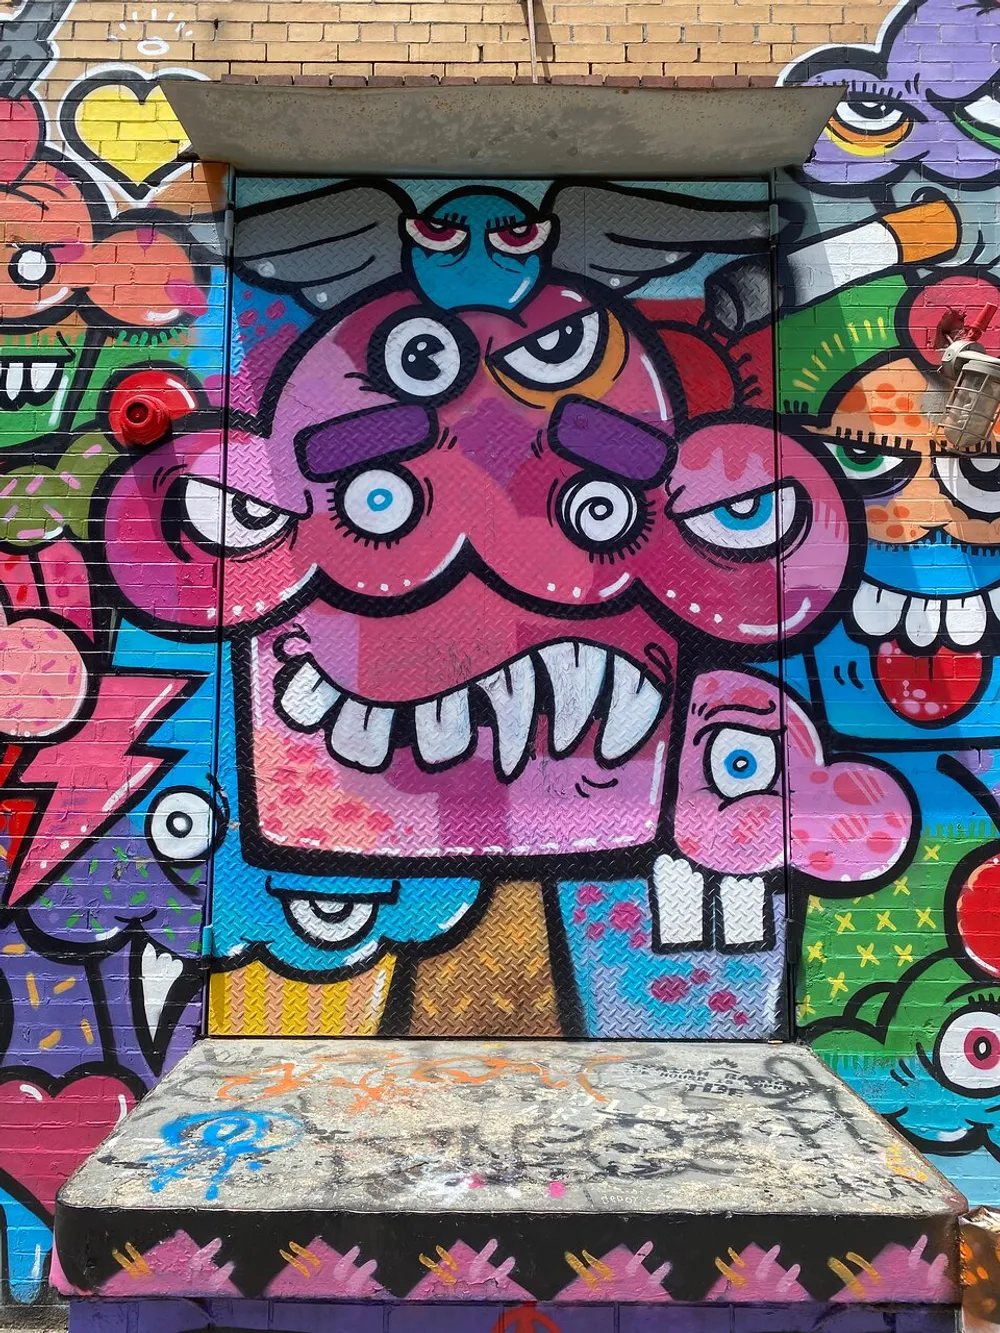 The image shows a colorful and vibrant graffiti mural of whimsical creatures with multiple eyes and expressive faces painted on an urban wall